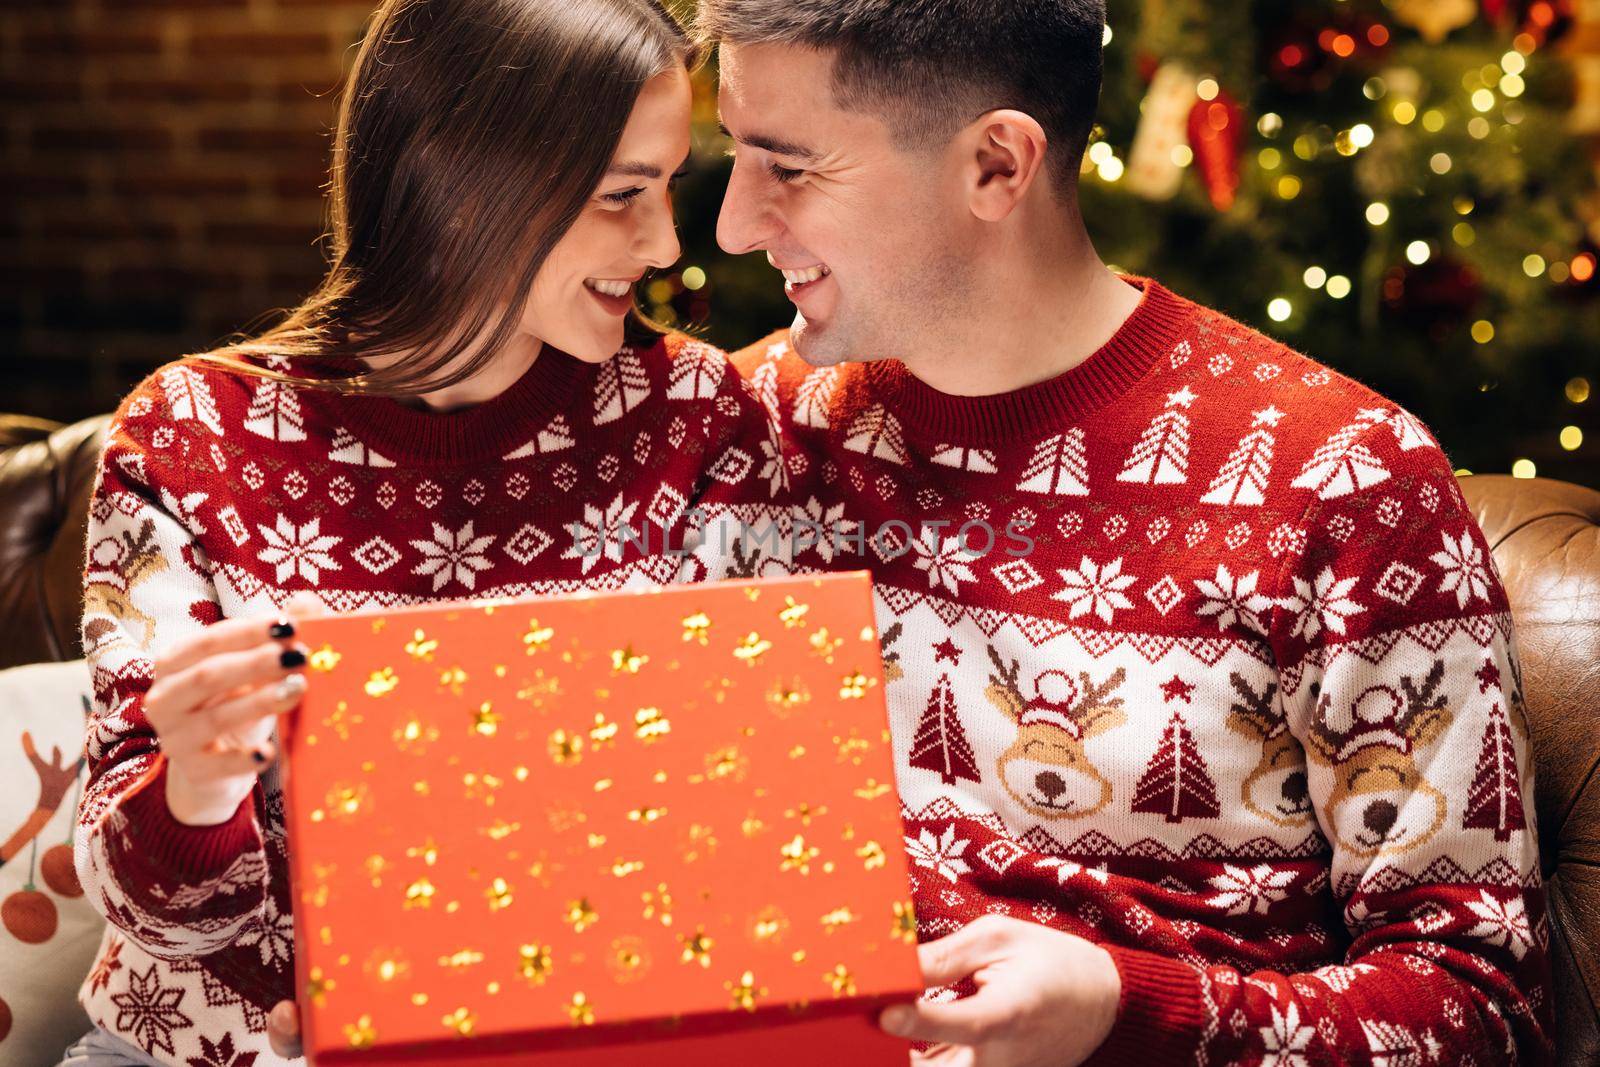 Happy man is making christmas gift to his beloved woman. Woman is surprised and excited after opening received gift box. Concept of holidays, romance, surprise. Holiday miracle by uflypro